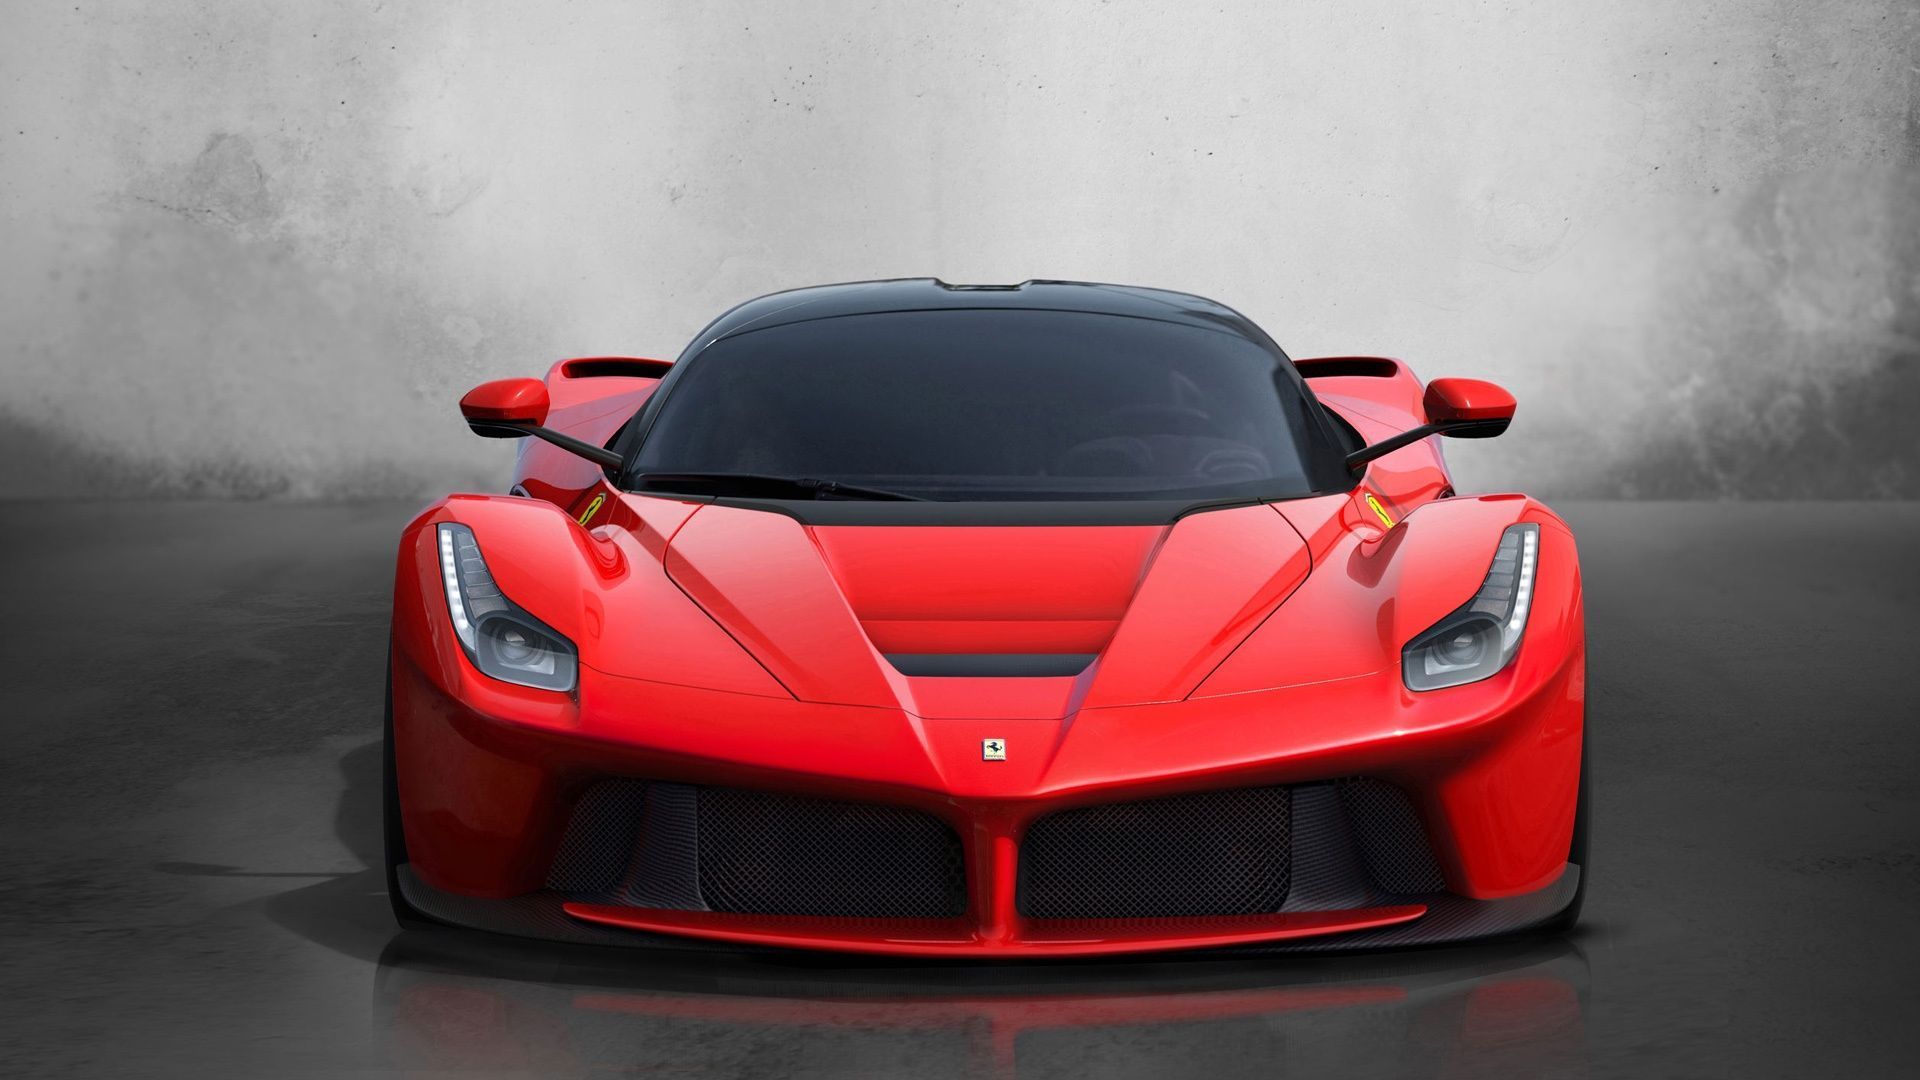 2014-ferrari-red-couloured-most-beautiful-and-latest-Car-Wallpaper-hd-1080p-free-download-2014.jpg